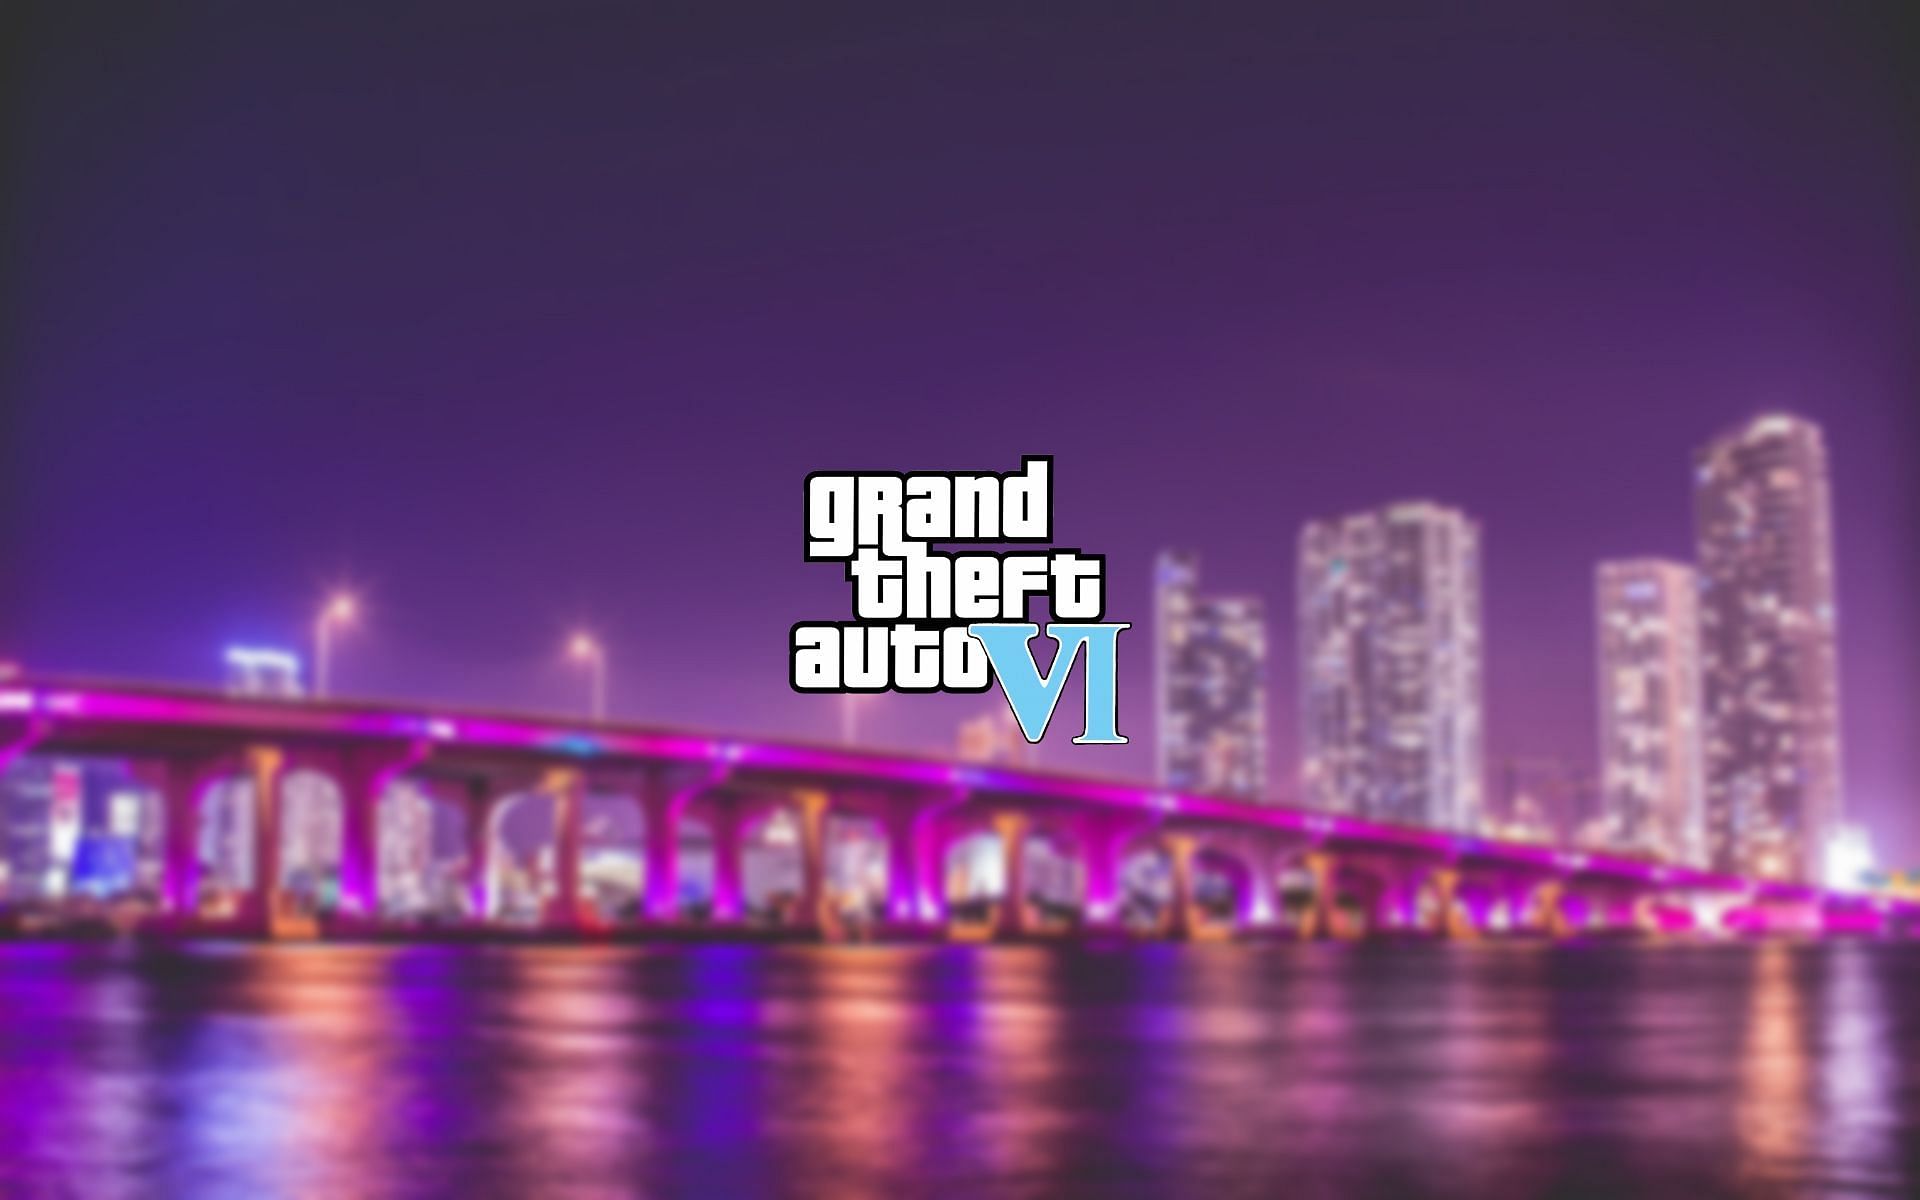 Ernæring katastrofe fremsætte Fans speculate whether GTA 6 will launch on PS4 and Xbox One